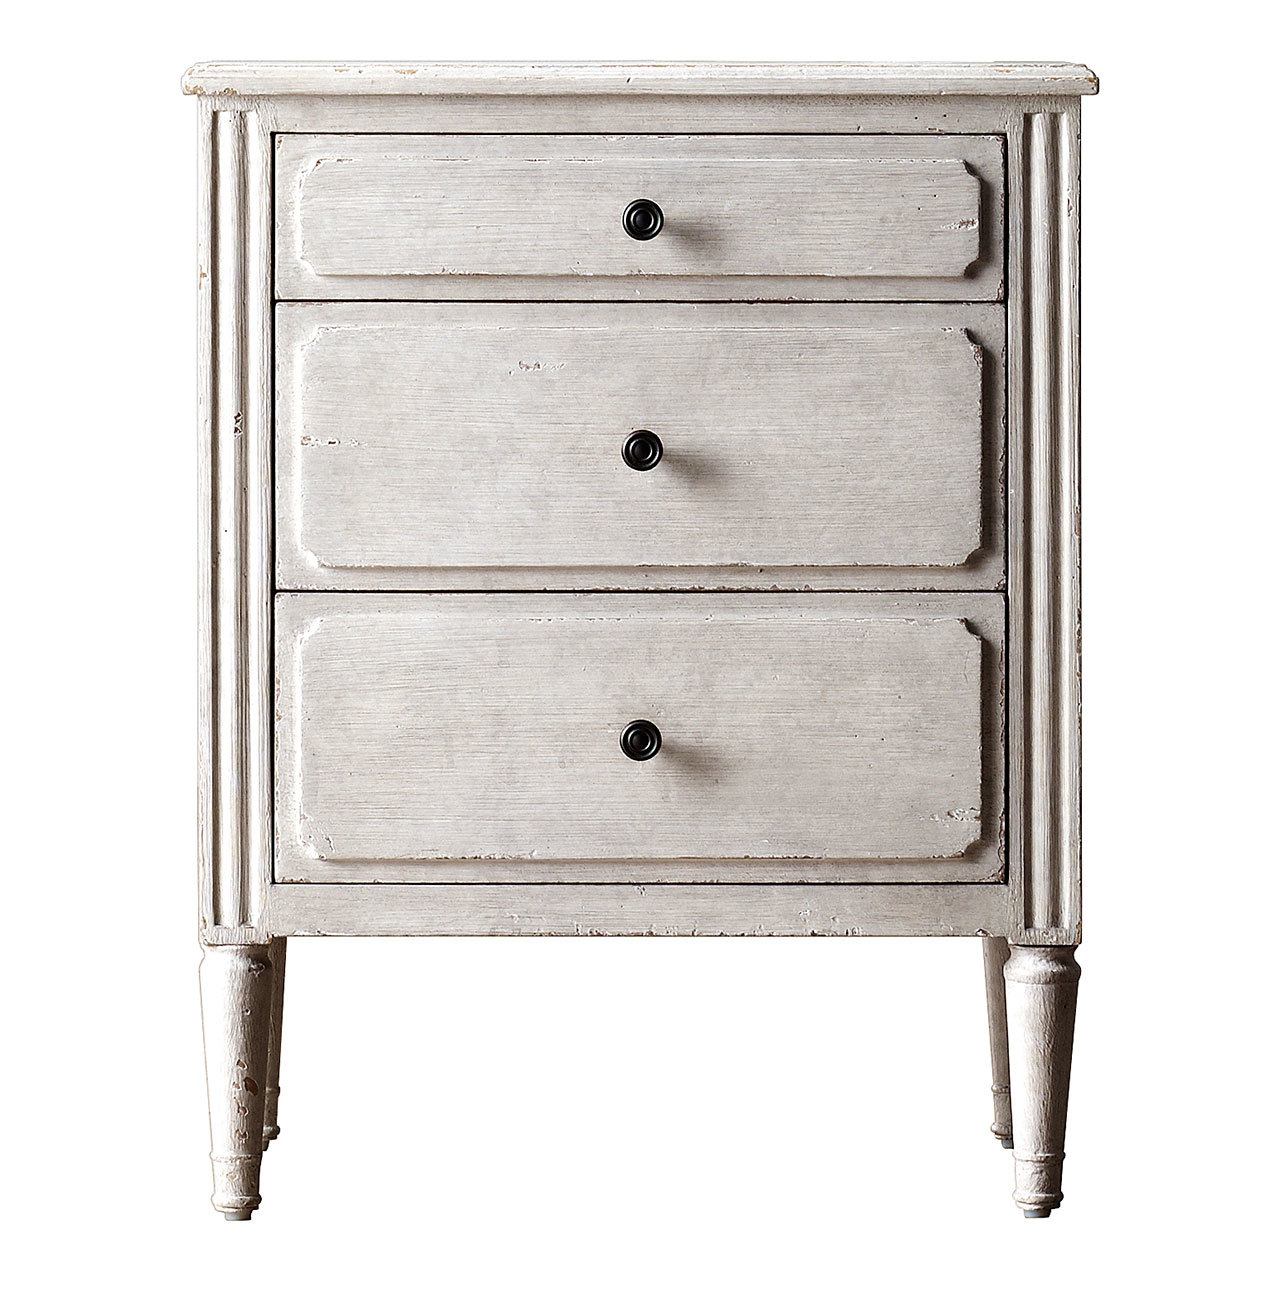 Nightstands with drawers, such as the Marcelle three-drawer nightstand ($619, rhbabyandchild.com), will help you keep a clean, uncluttered bedroom. (RH Baby & Child)